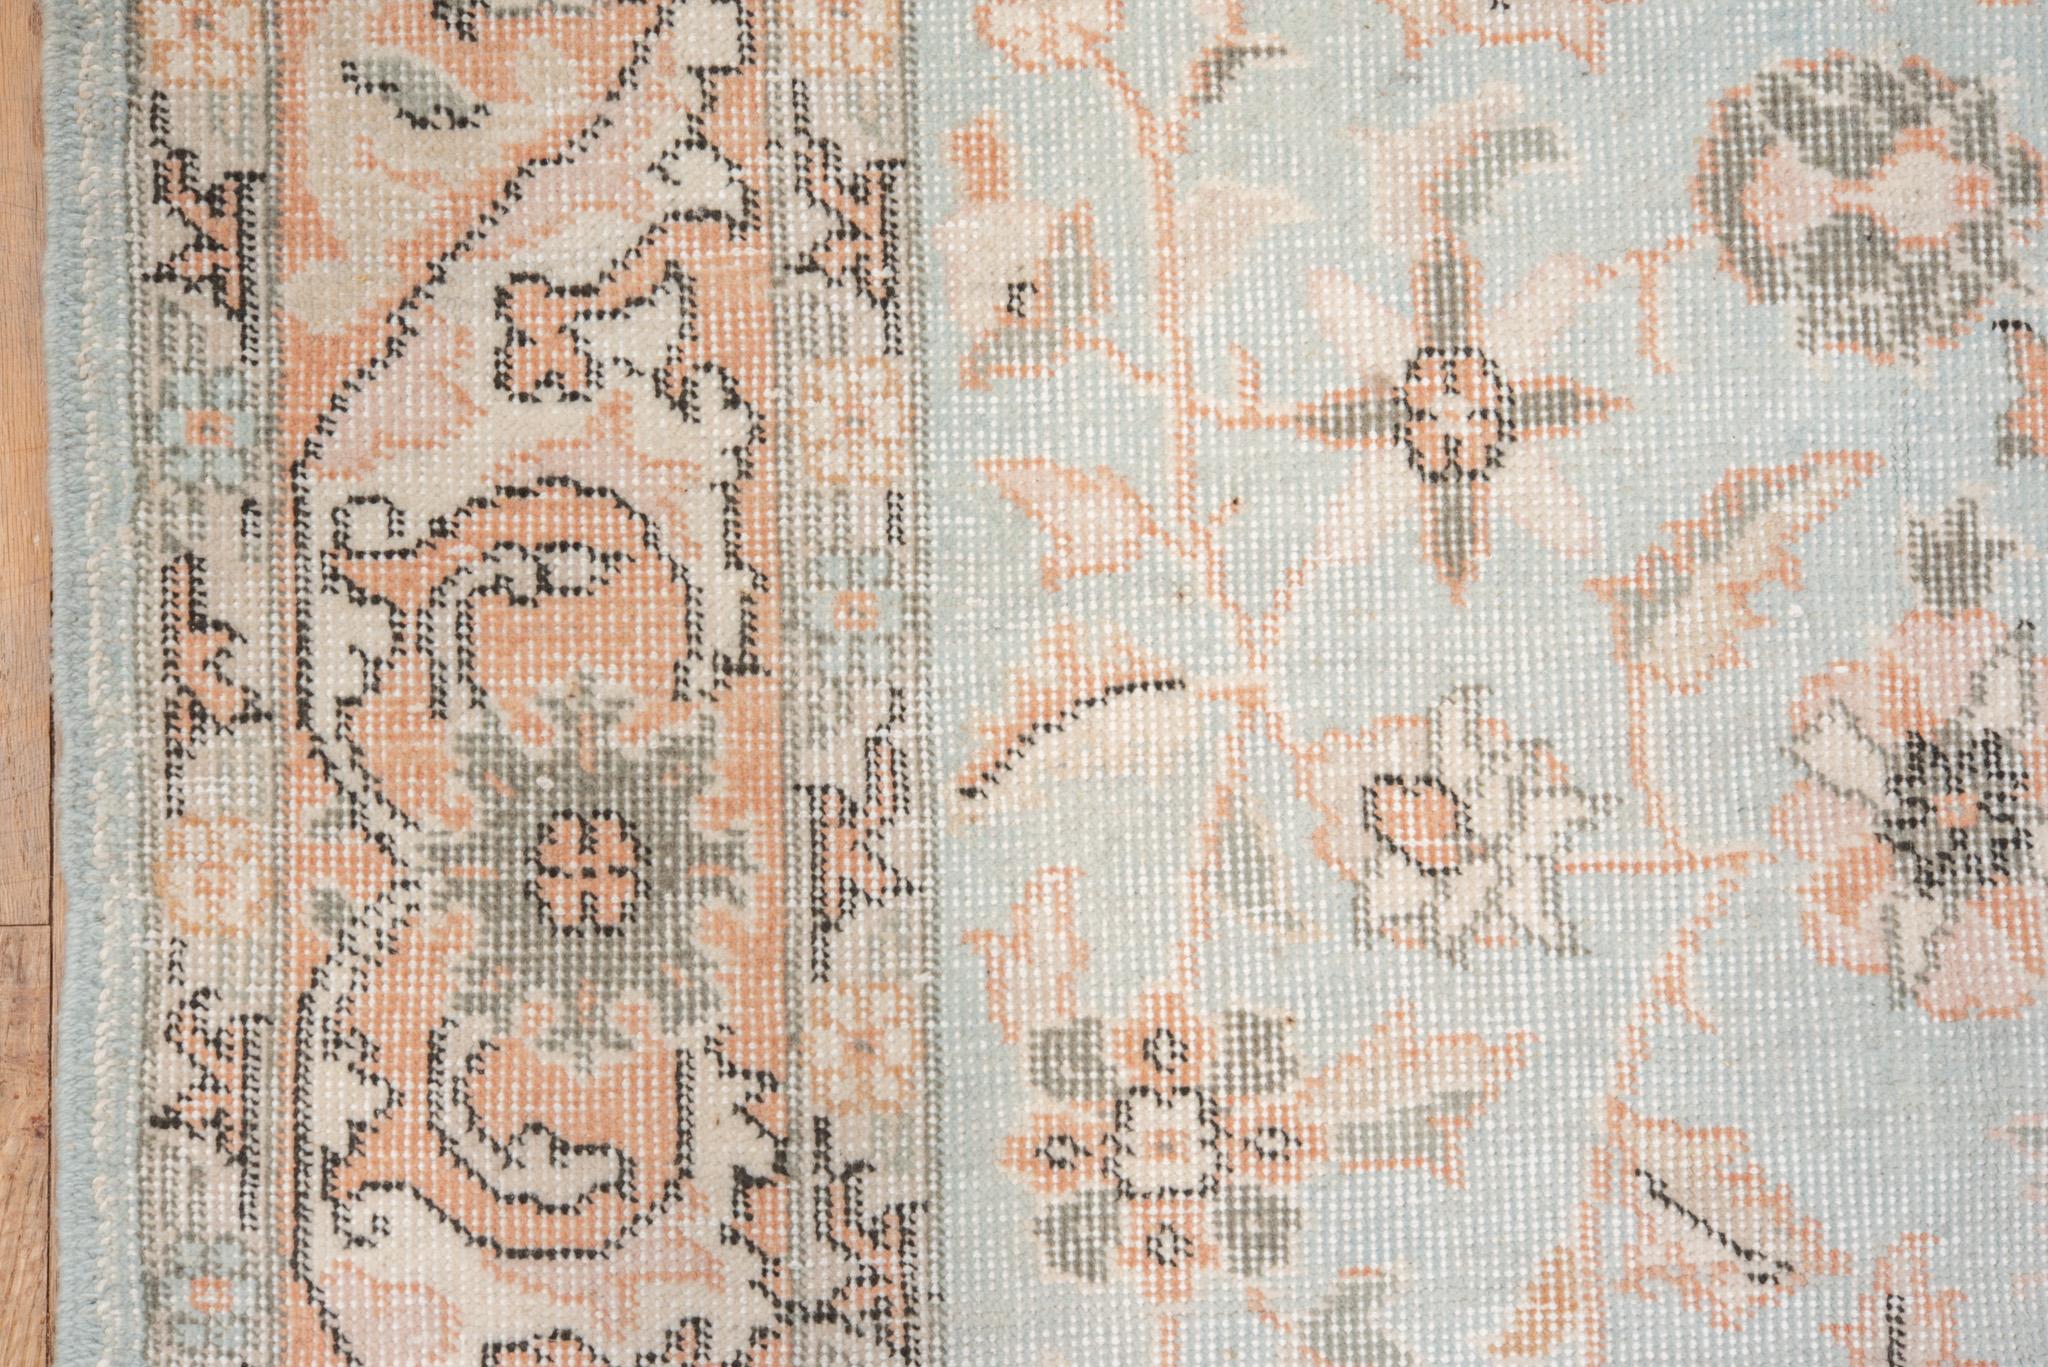 Hand-Knotted Eliko Rugs by David Ariel Turkish Sparta Rug, Aqua Field, Salmon Borders For Sale